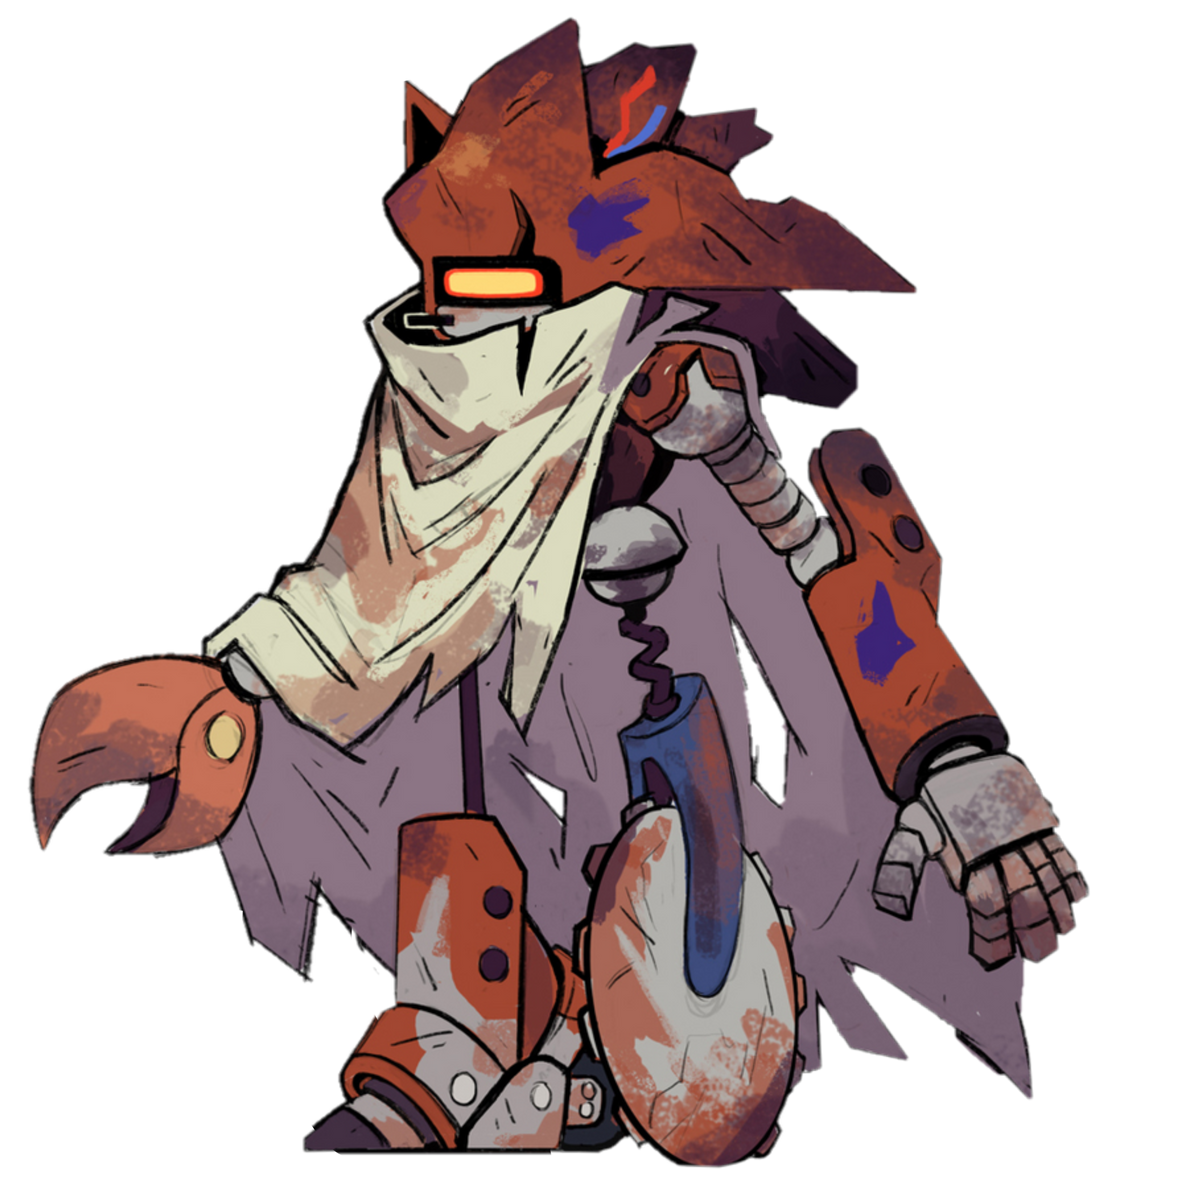 Mecha sonic redesign by zyote -- Fur Affinity [dot] net